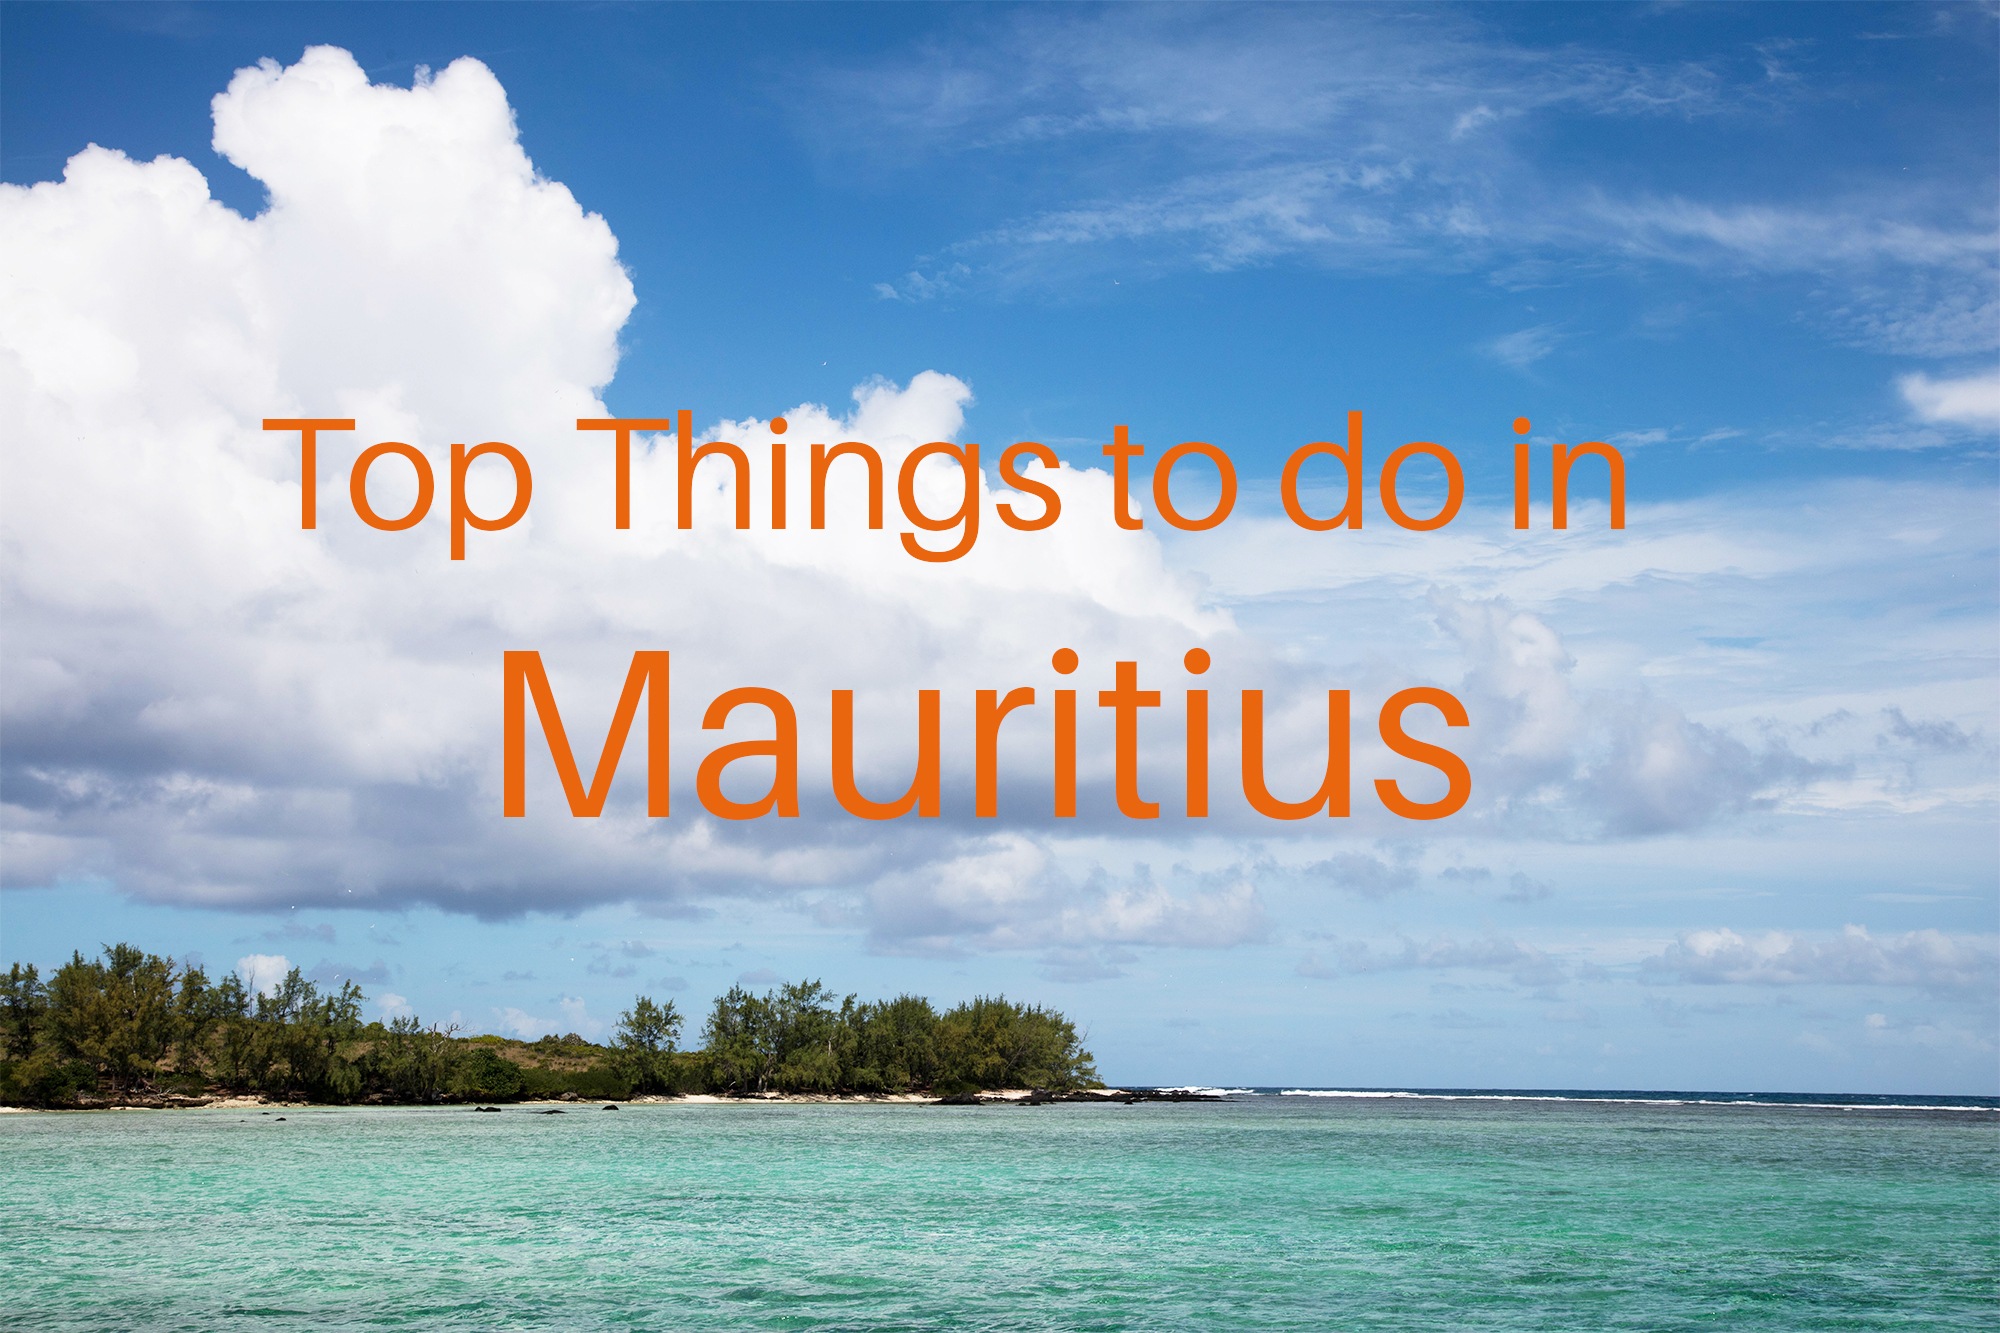 Things to Do in Mauritius - Island and water landscape.